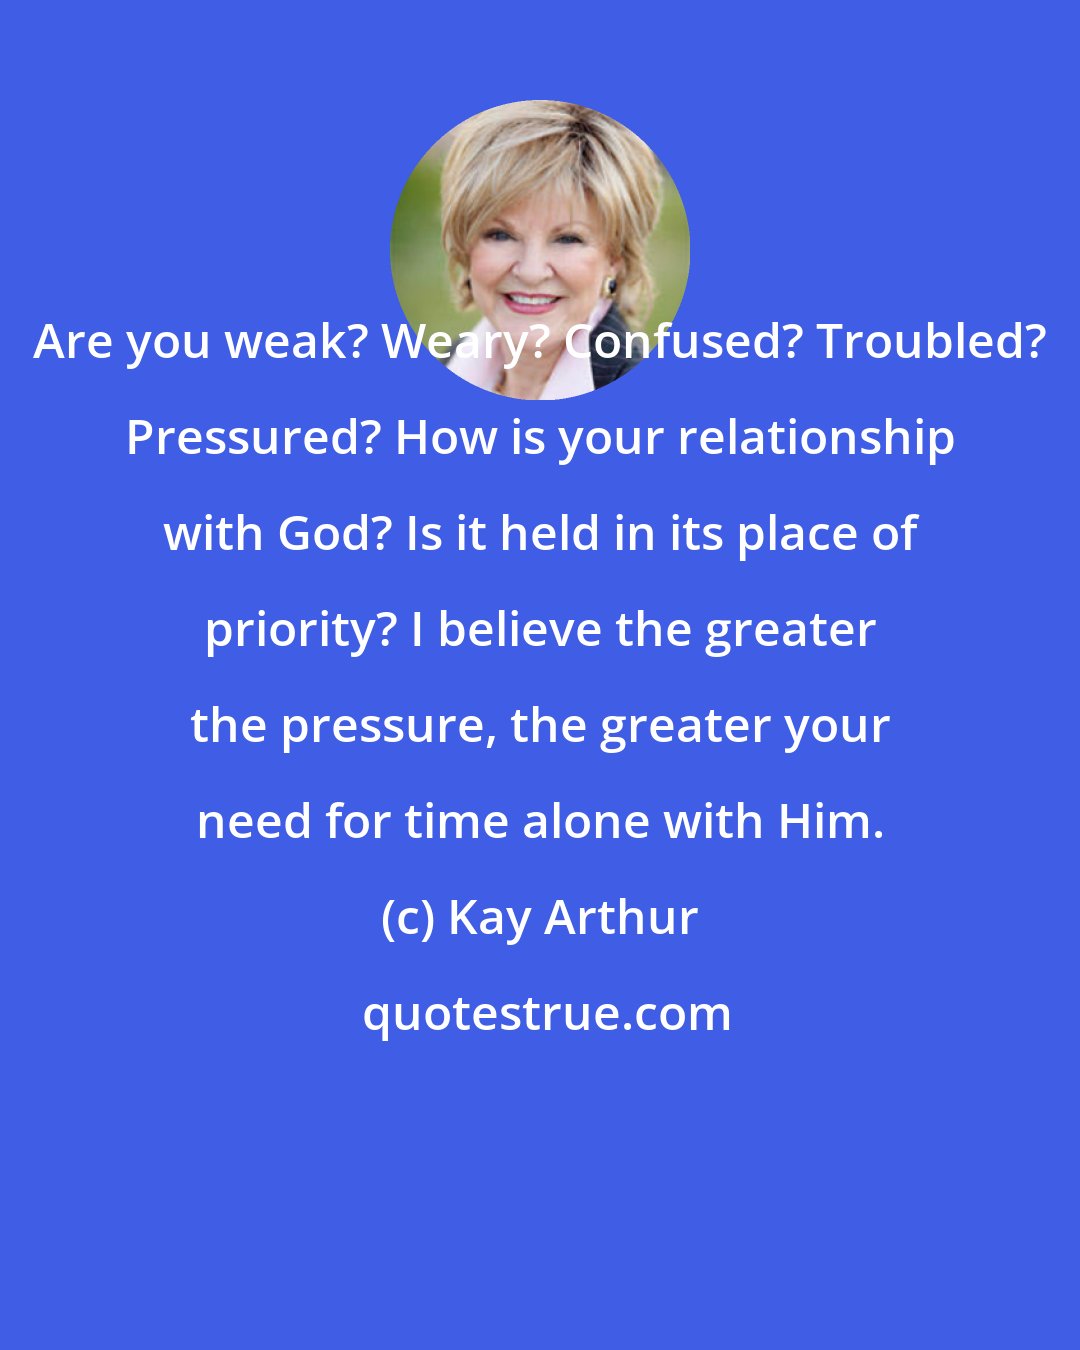 Kay Arthur: Are you weak? Weary? Confused? Troubled? Pressured? How is your relationship with God? Is it held in its place of priority? I believe the greater the pressure, the greater your need for time alone with Him.